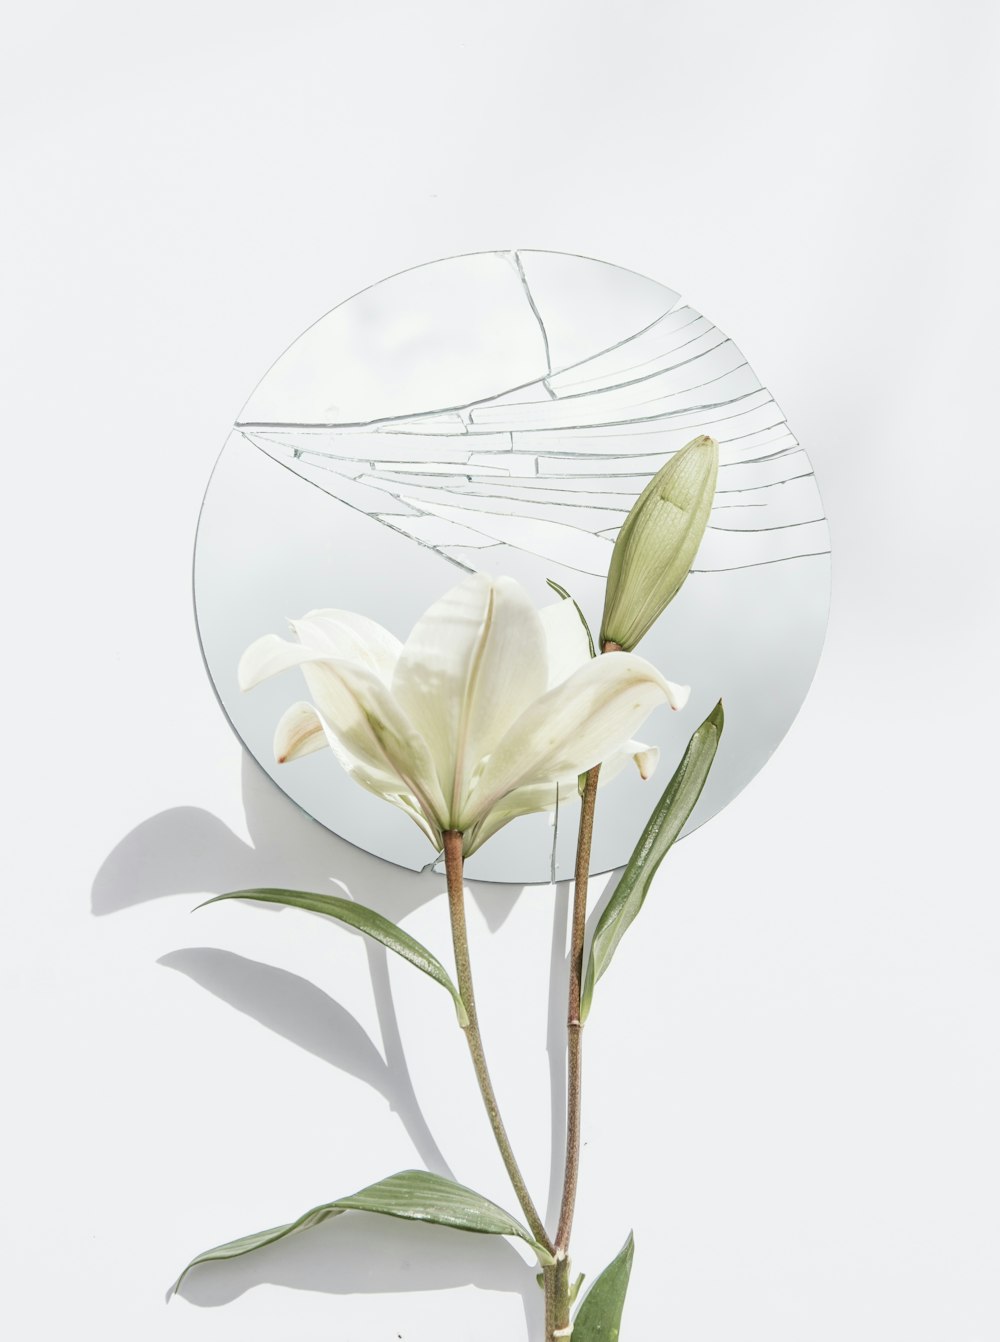 white petaled flower and mirror